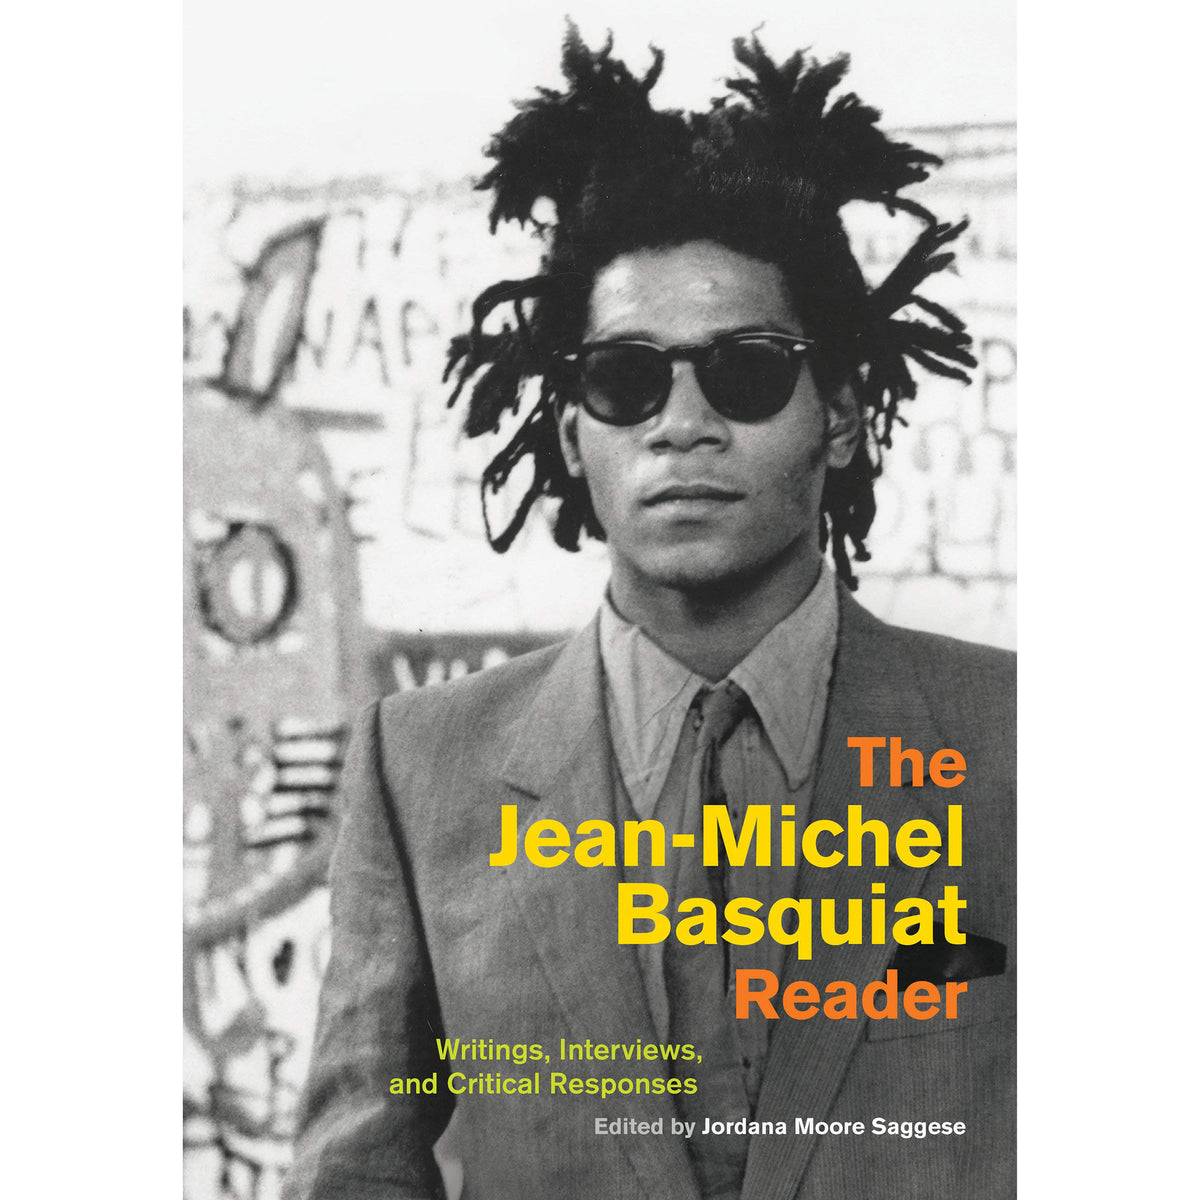 The Jean-Michel Basquiat Reader: Writings, Interviews, and Critical Responses